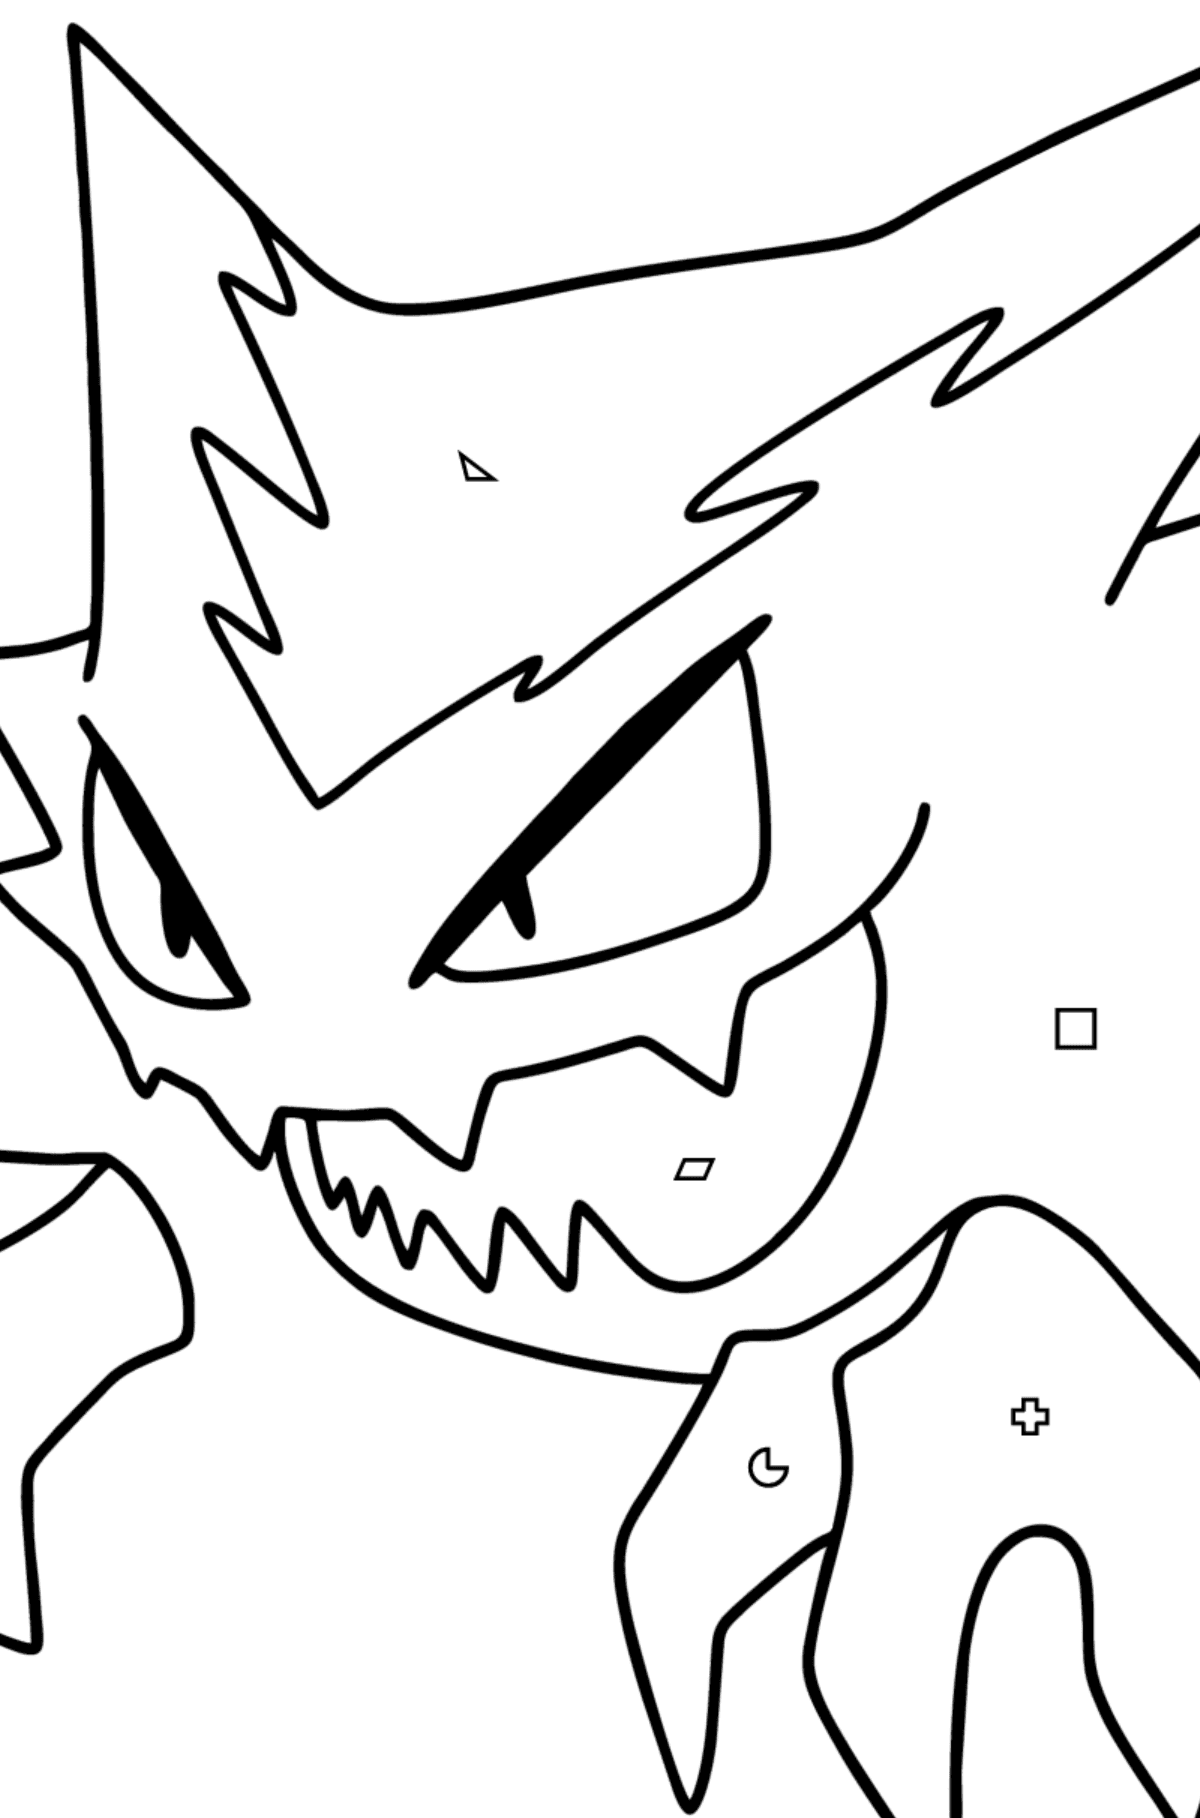 Pokémon Go Haunter coloring page - Coloring by Geometric Shapes for Kids